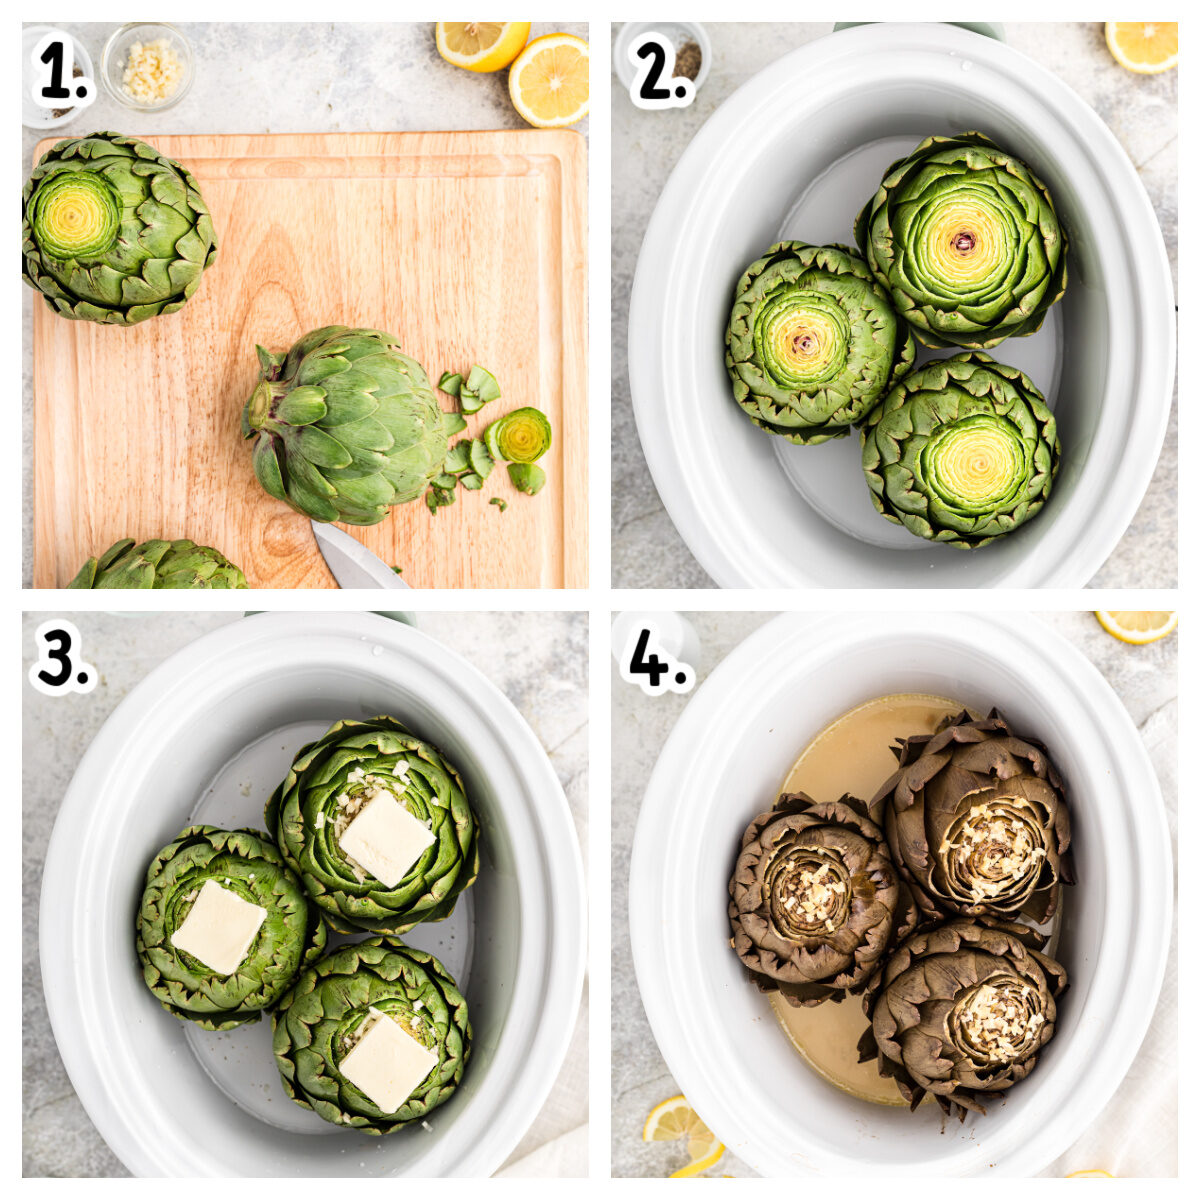 4 images showing how to cook artichokes in a slow cooker.